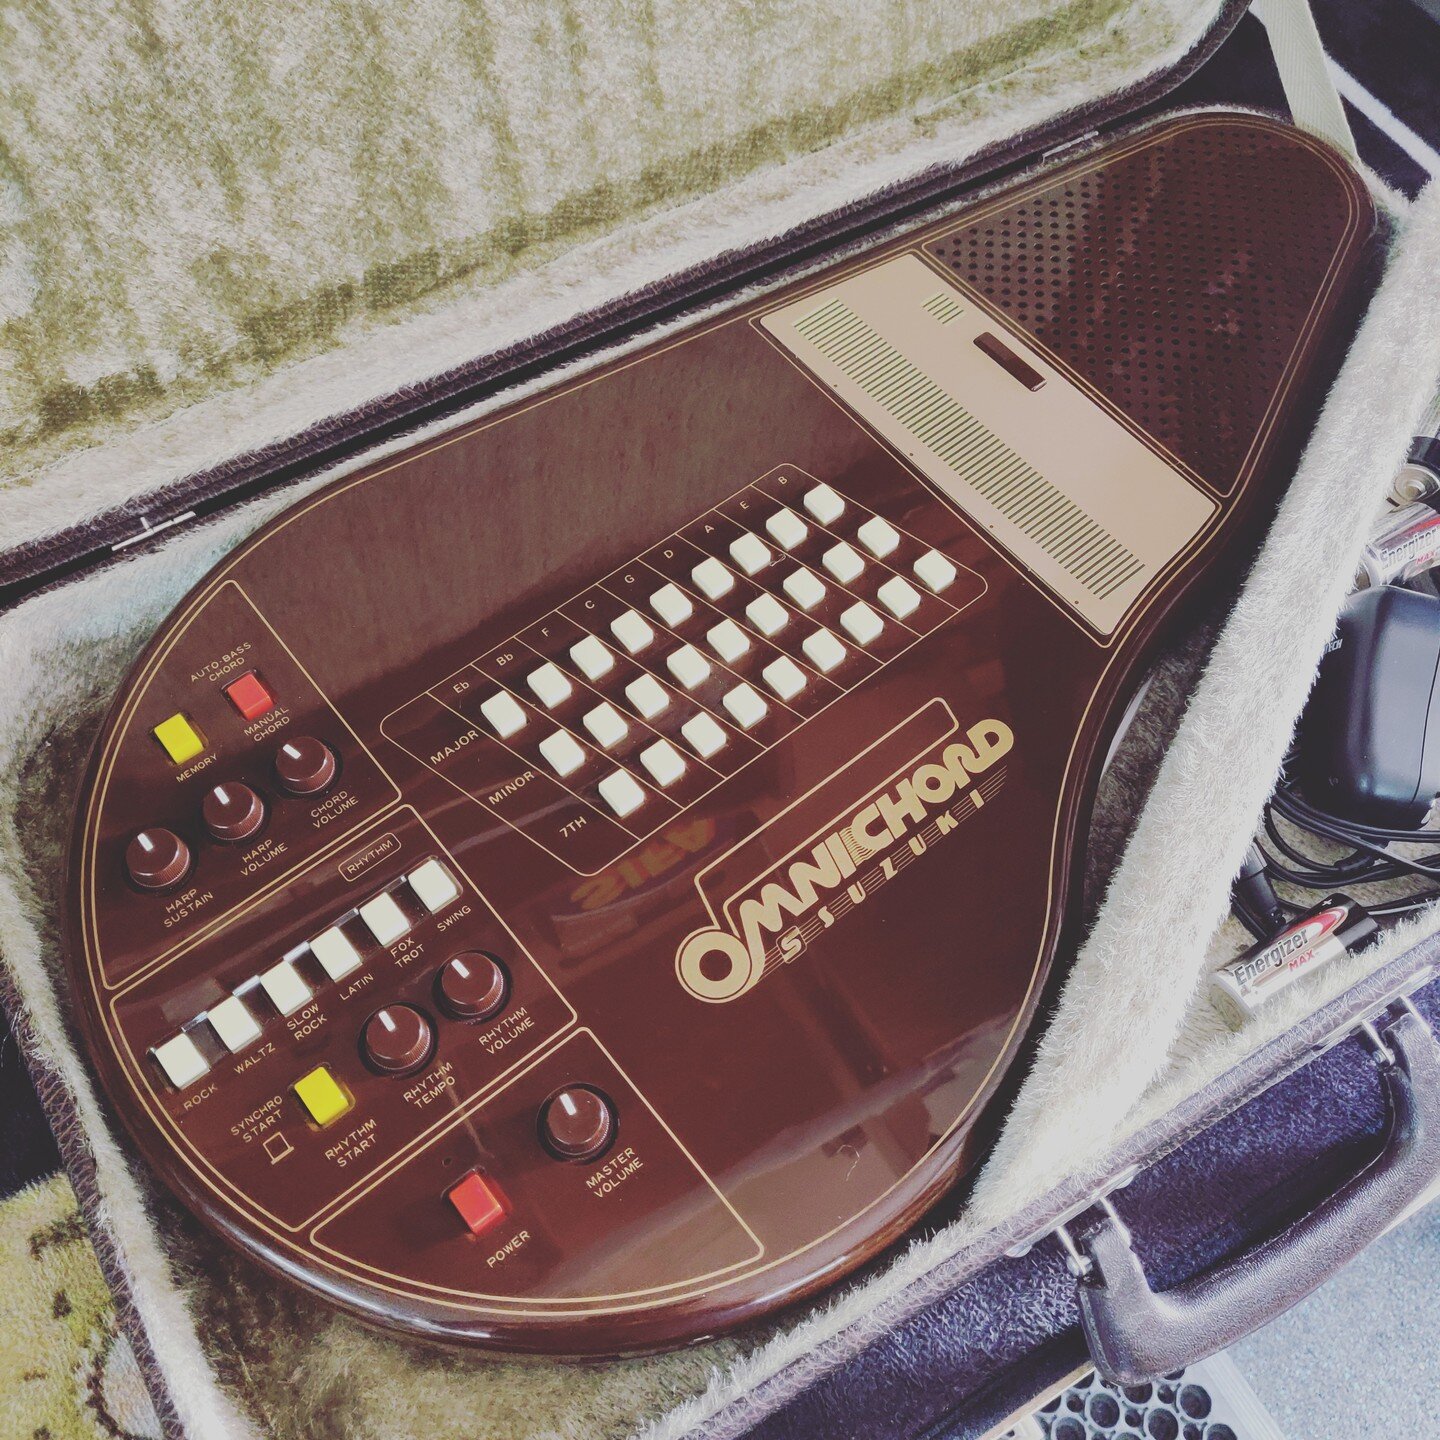 Got the chance to work on a vintage and quite rare Suzuki Omnichord OM27 this earlier this year. We sourced a power adapter for it and replaced a few chord button switches that had worn out. Very cool instrument indeed - if you're Zelda fan, I believ